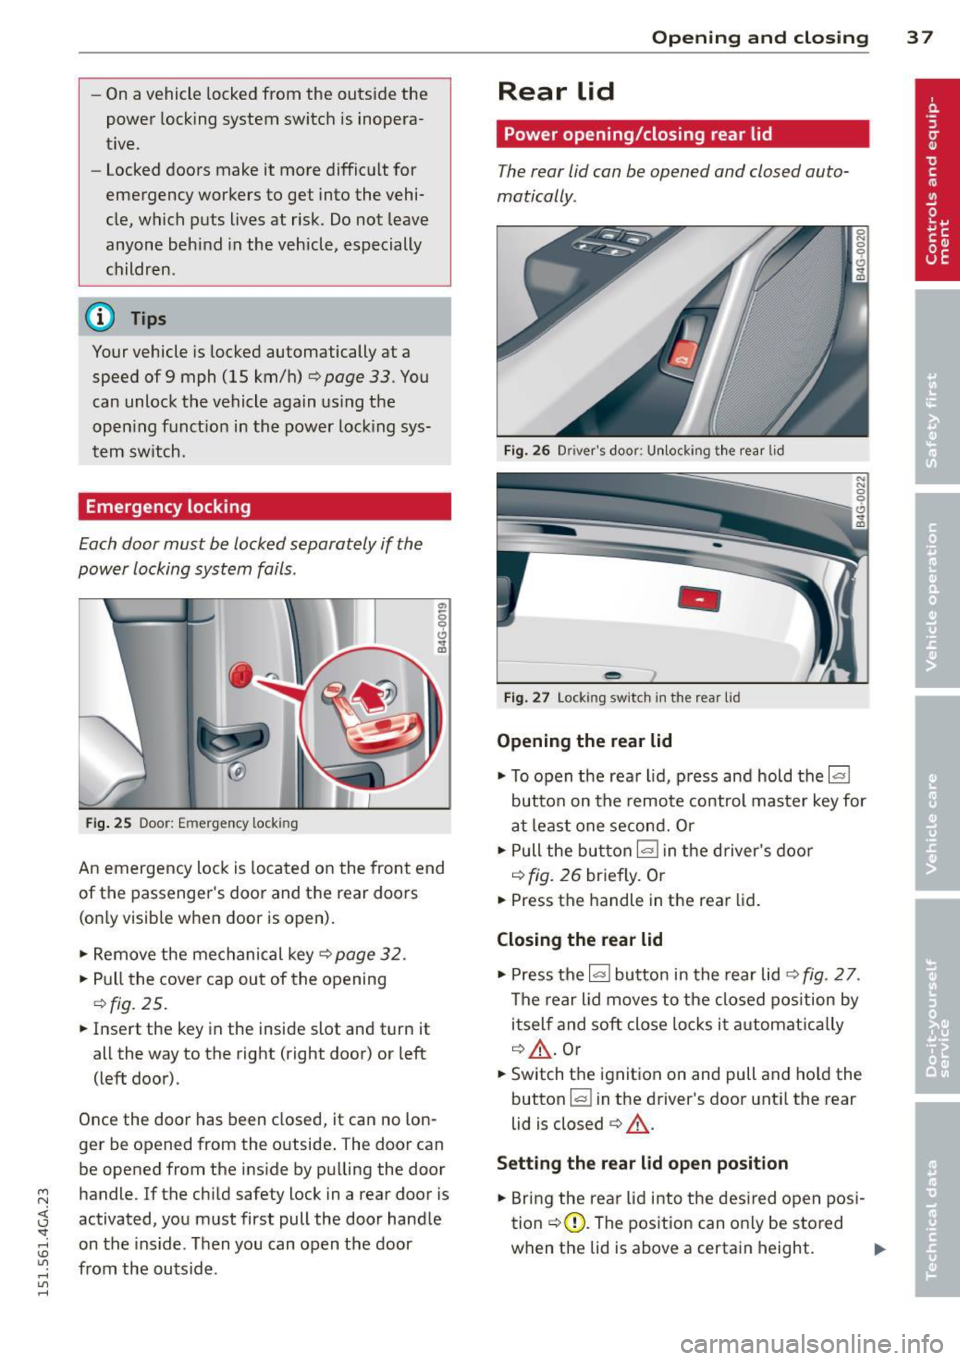 AUDI S7 2015 Owners Guide M N <( I.J "". rl I.O 
" rl 
" rl 
-On a vehicle  locked from  the  outside  the 
power  locking  system  switch  is inopera­
t ive. 
- Locked doors  make it  more difficult  for 
emergency  worker